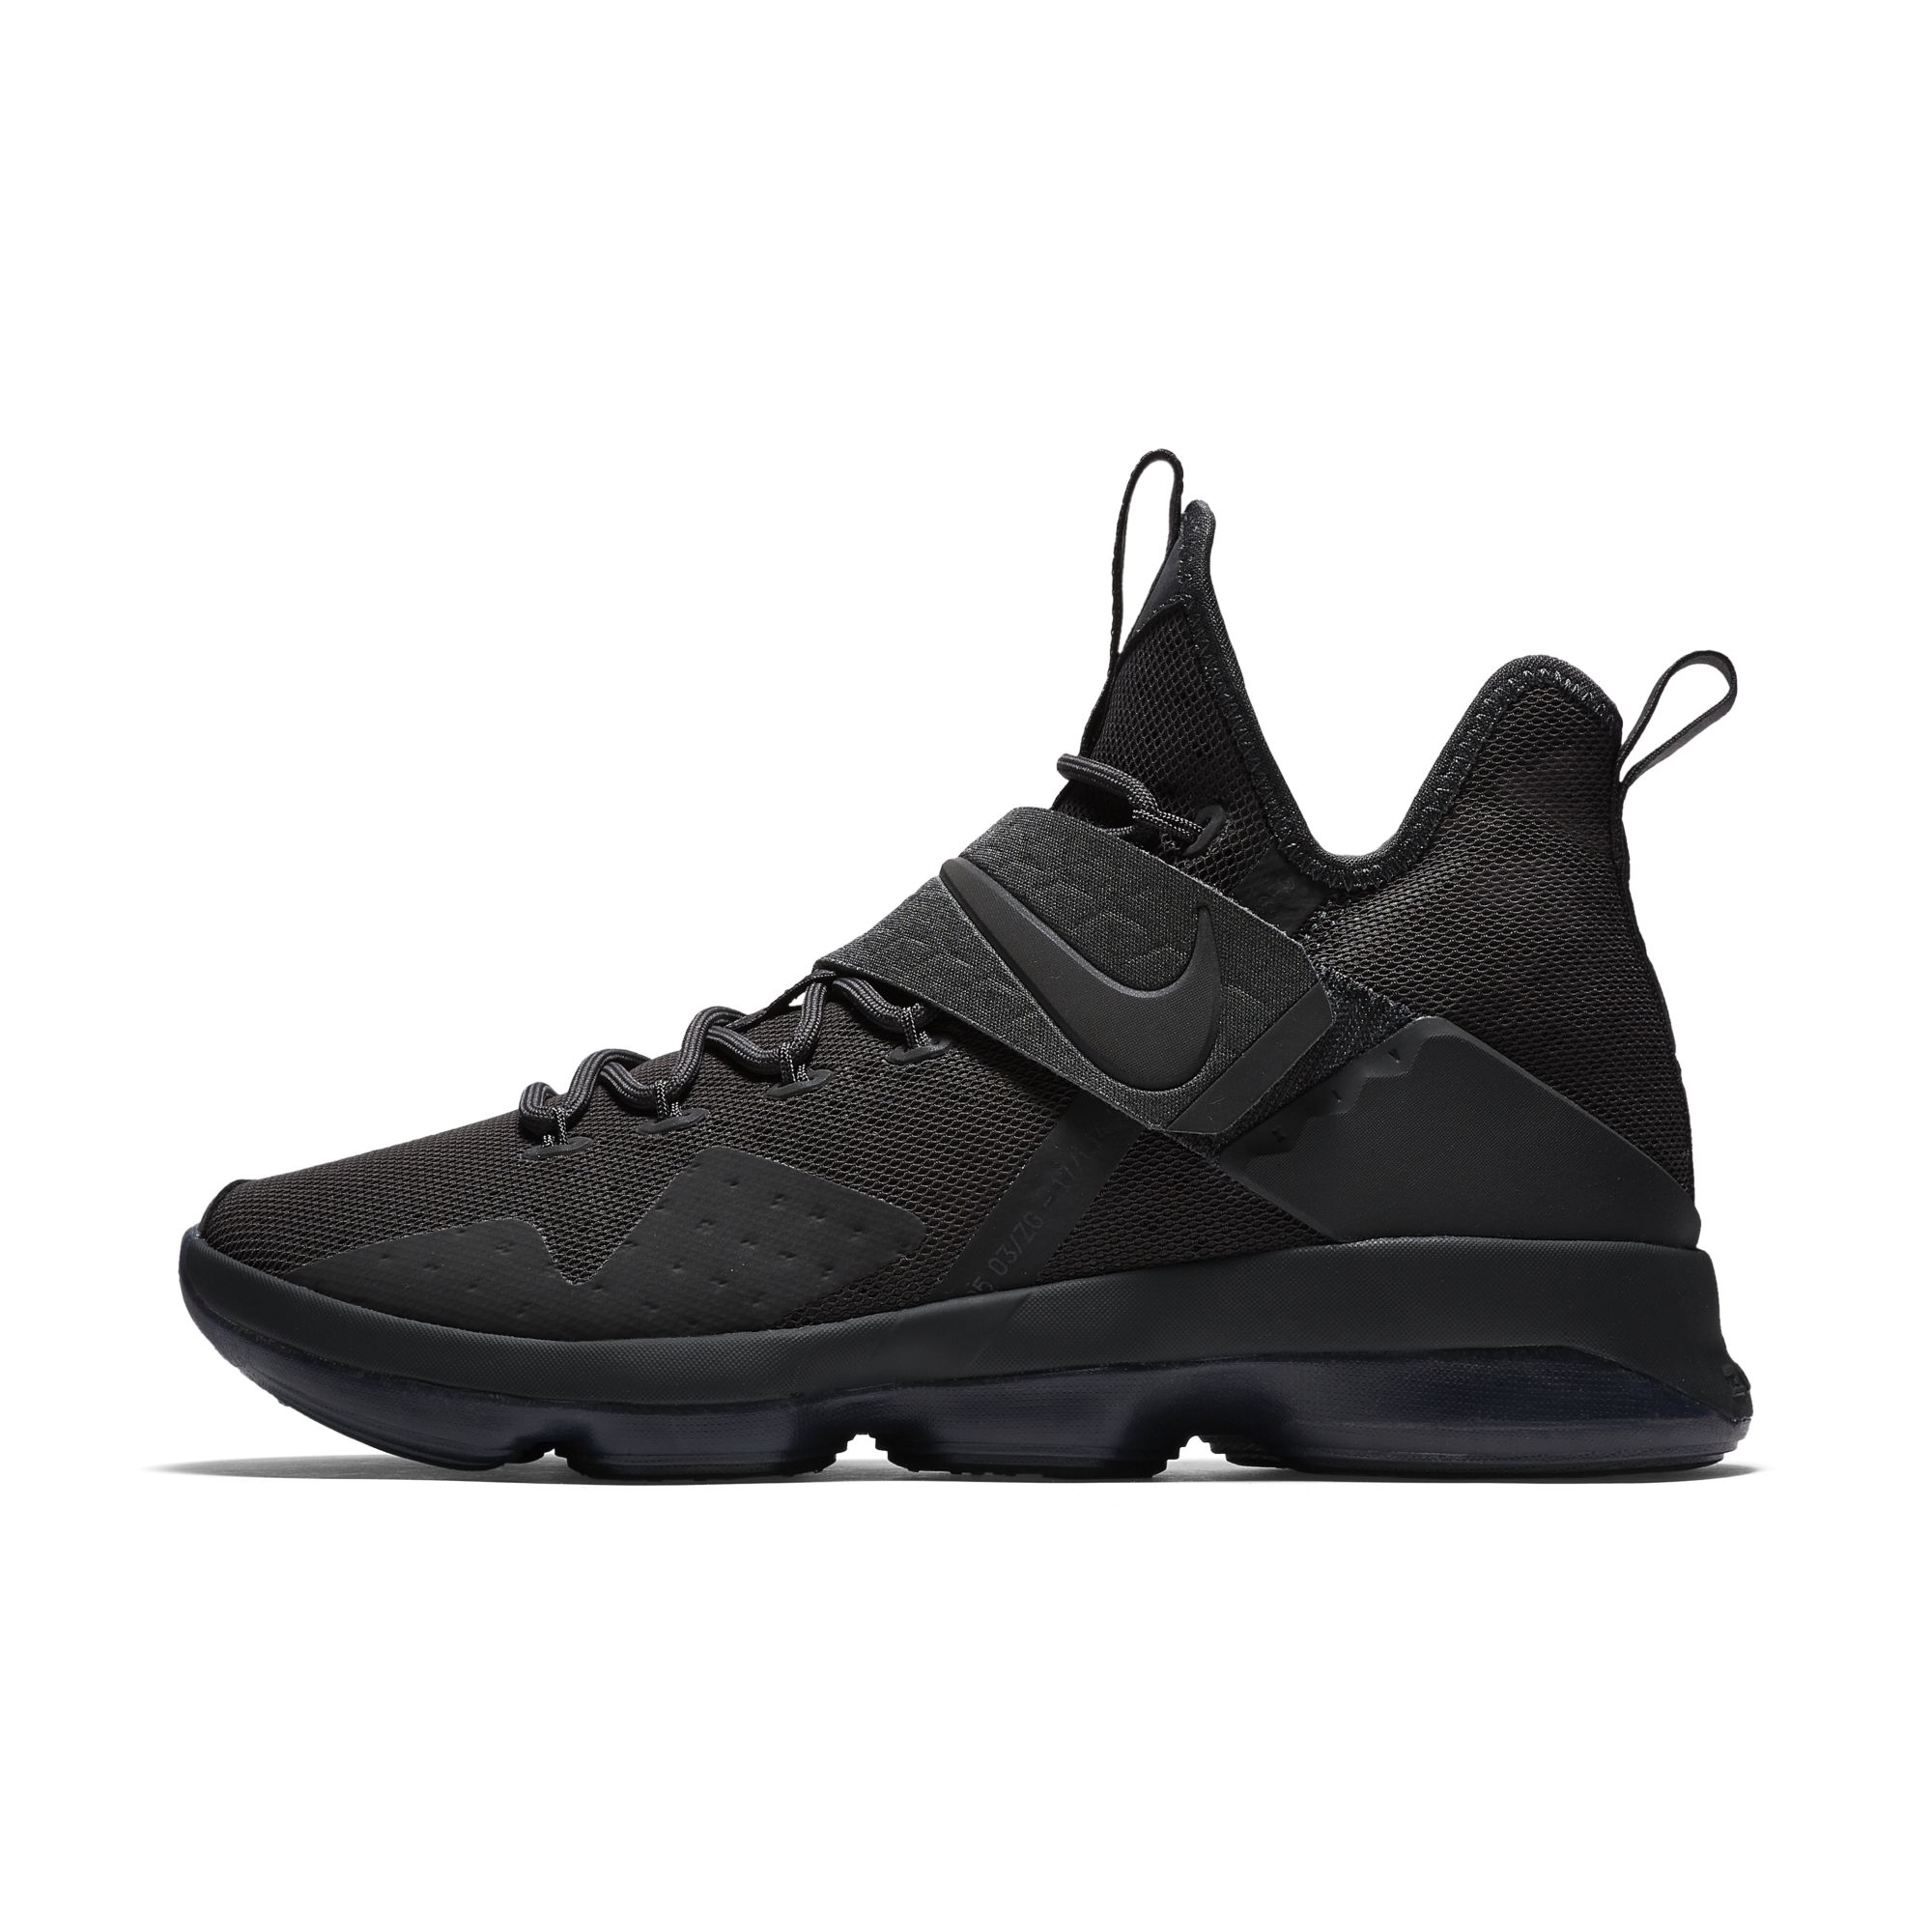 A Limited Blacked-Out Nike LeBron 14 